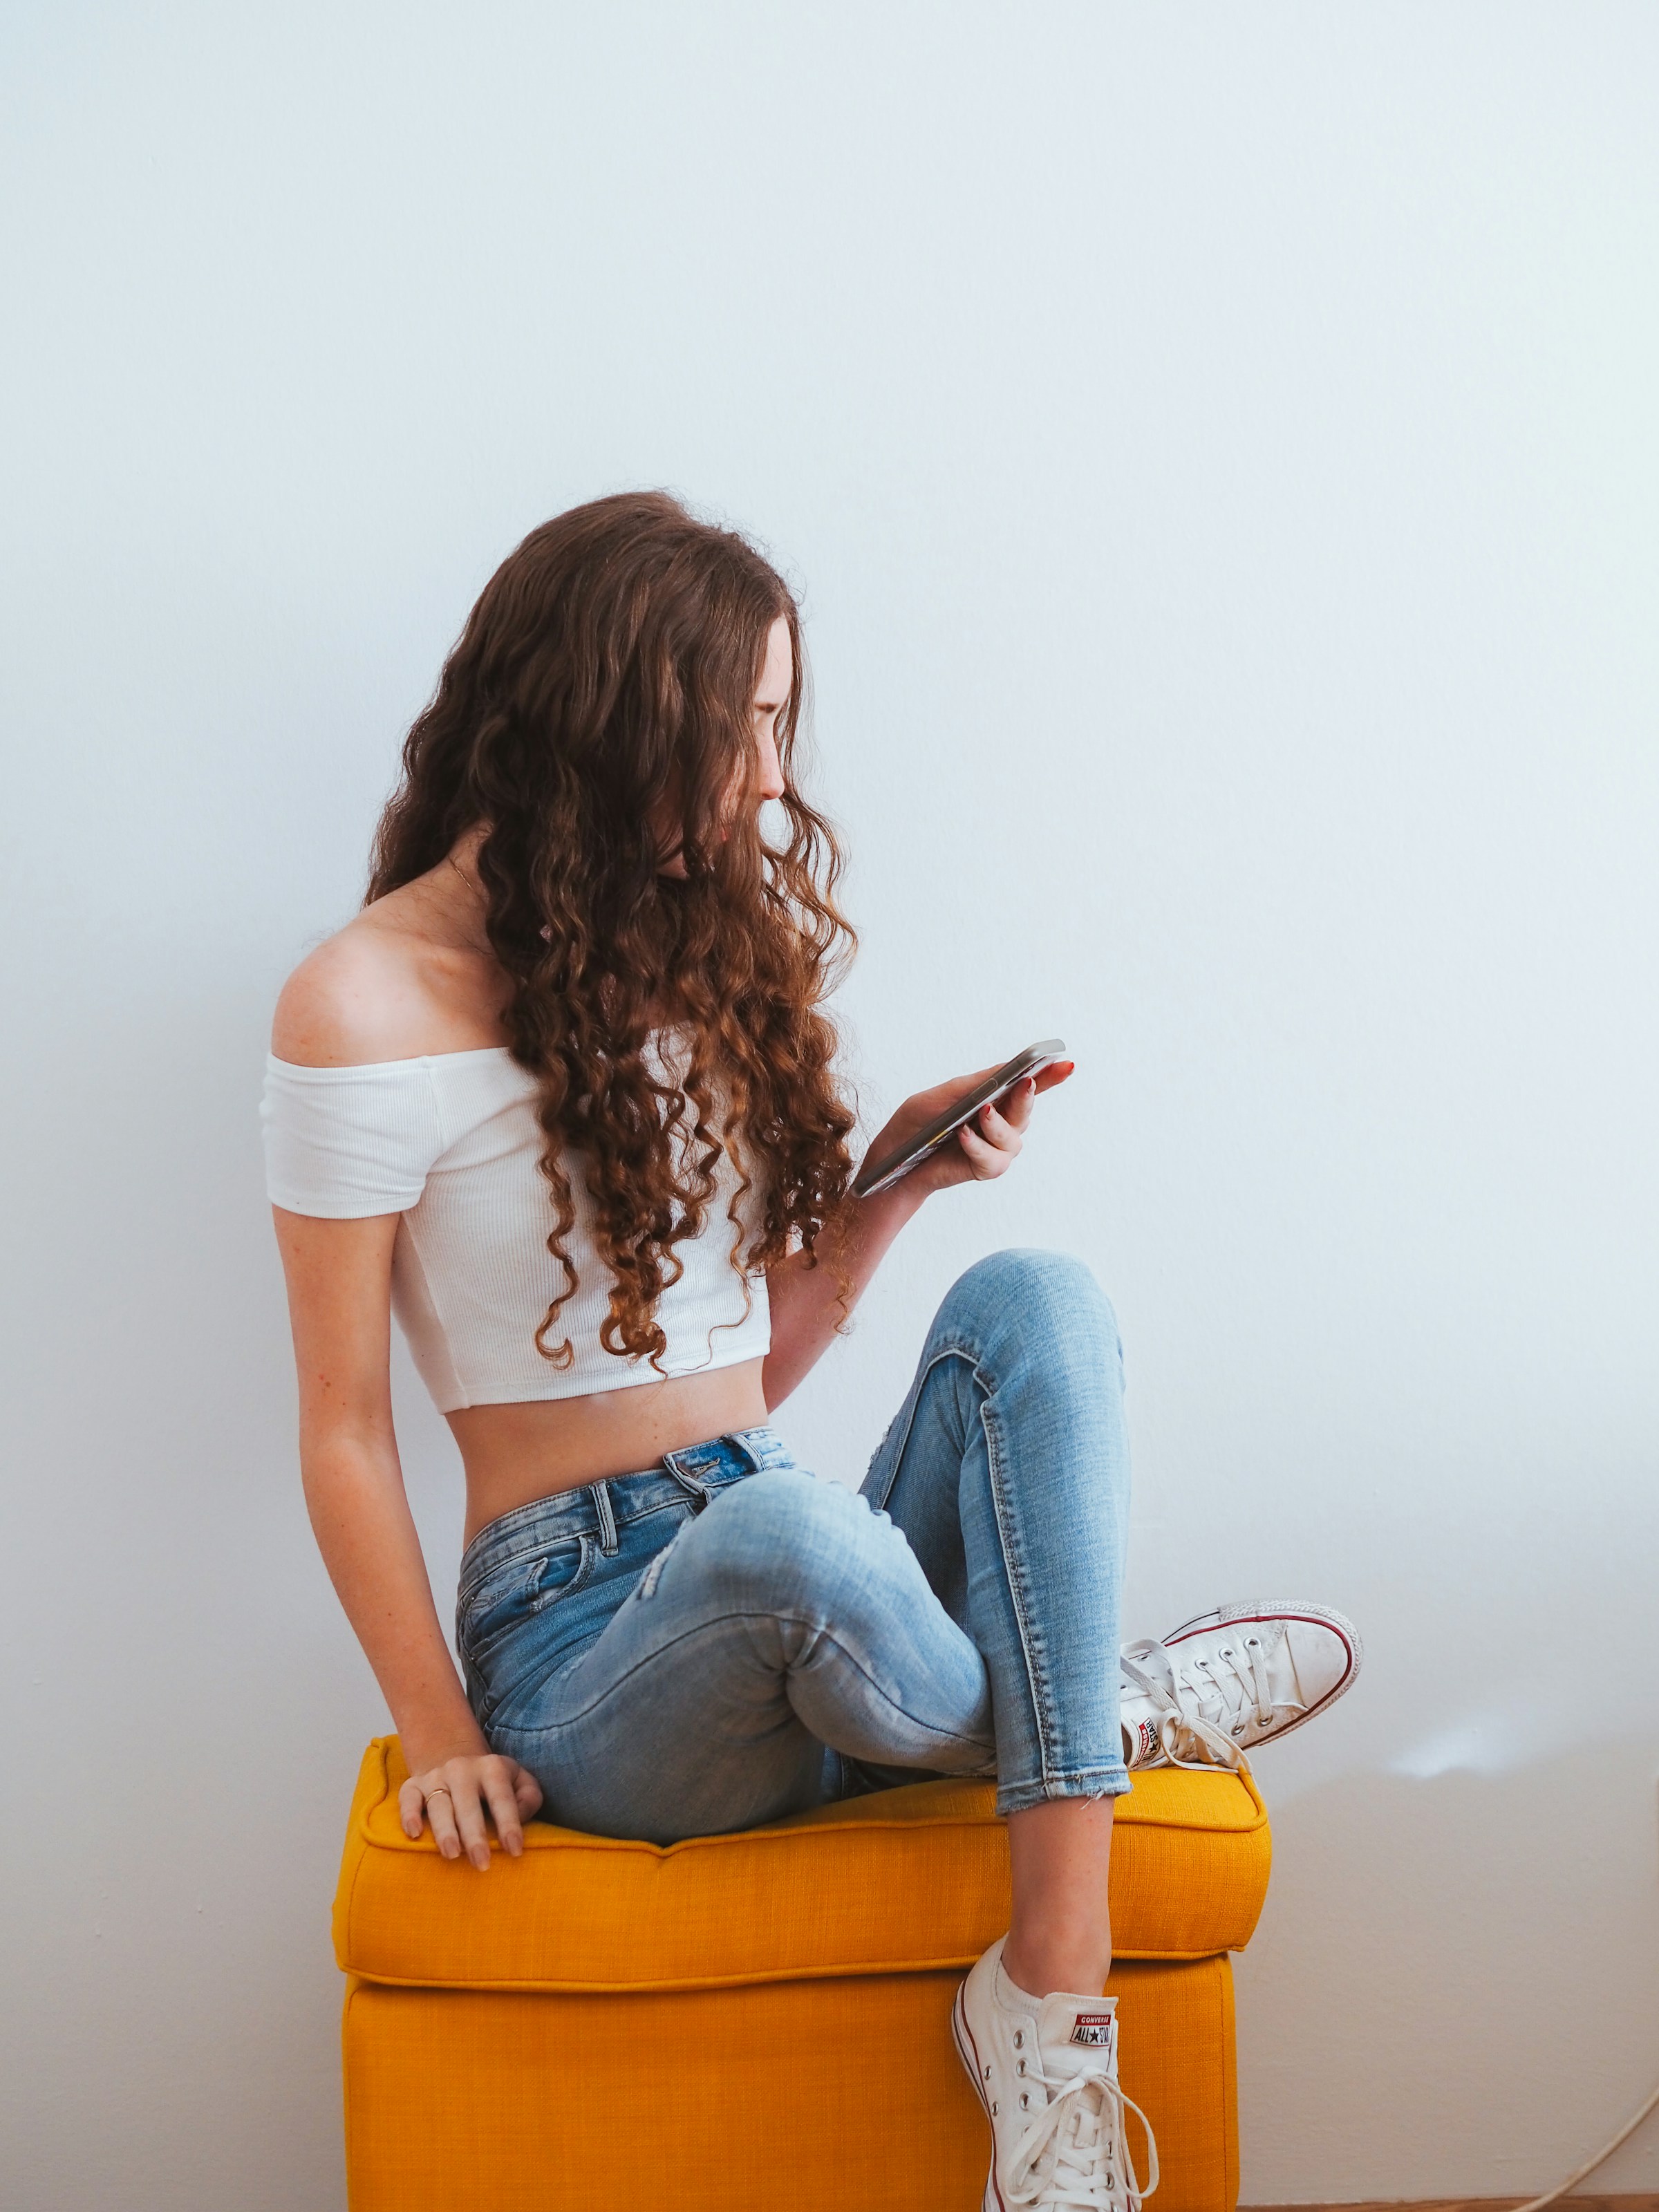 A young woman holding her phone | Source: Unsplash